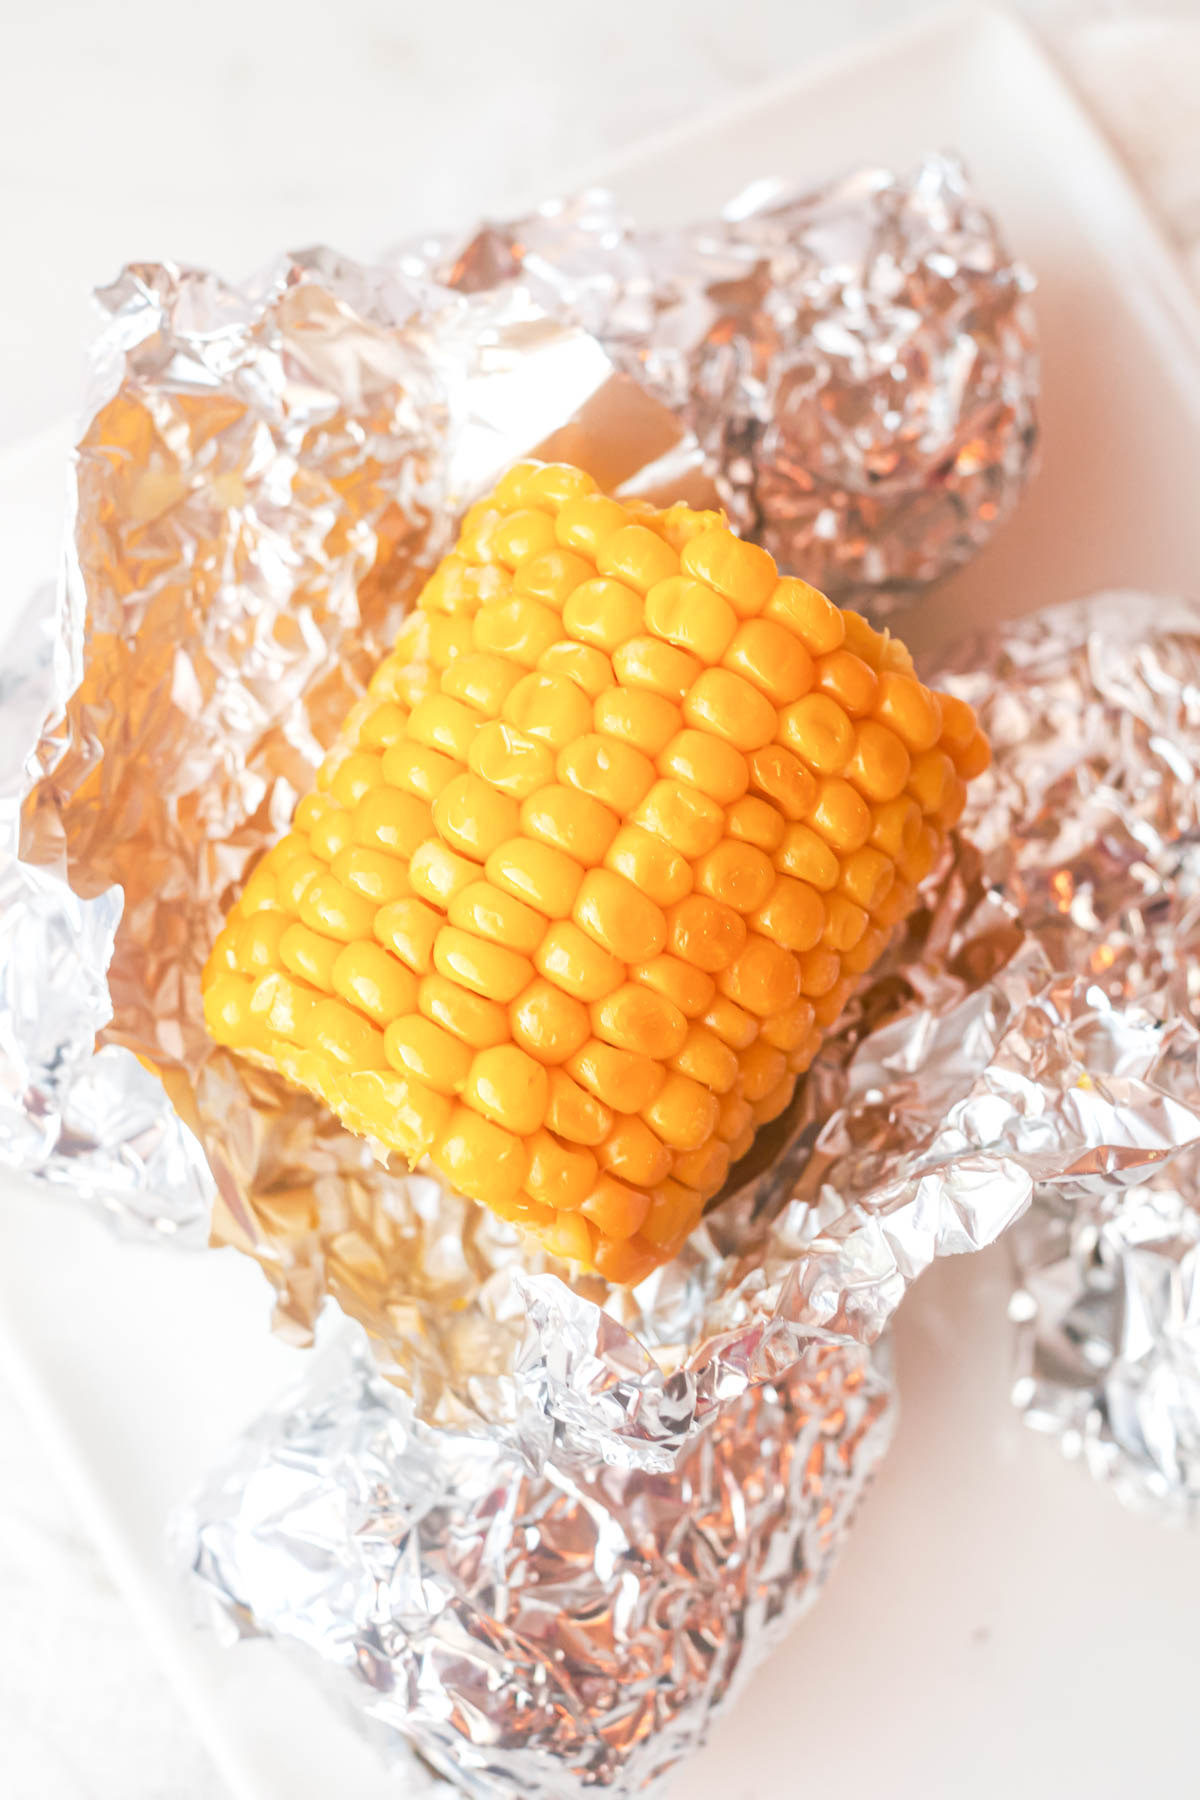 the complete corn on the cob recipe in the oven